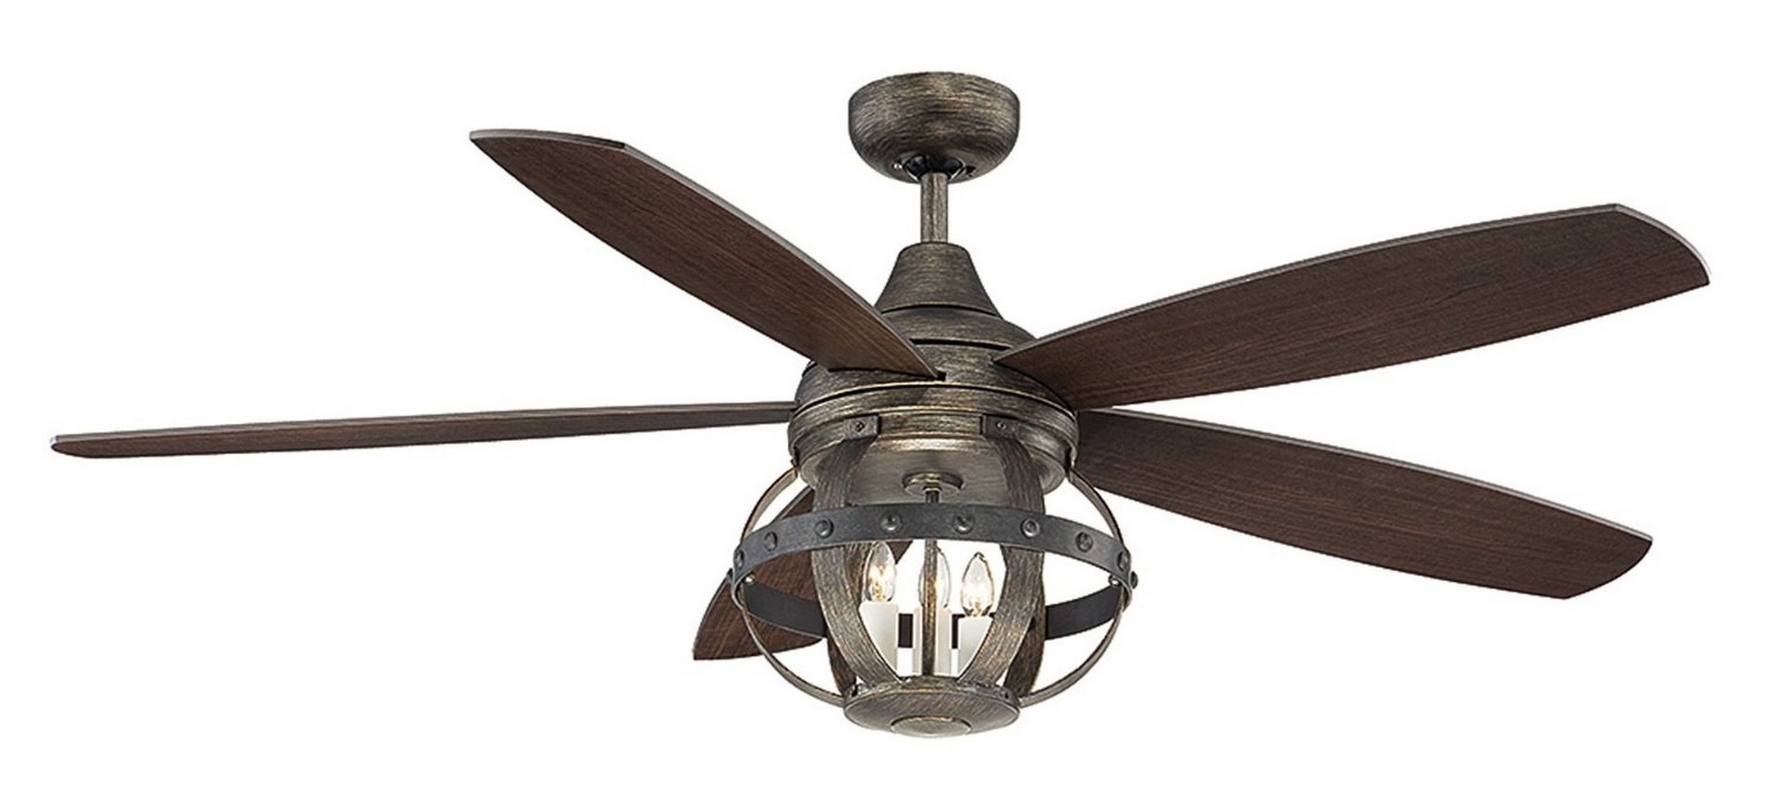 Permalink to Stylish Ceiling Fans With Lights